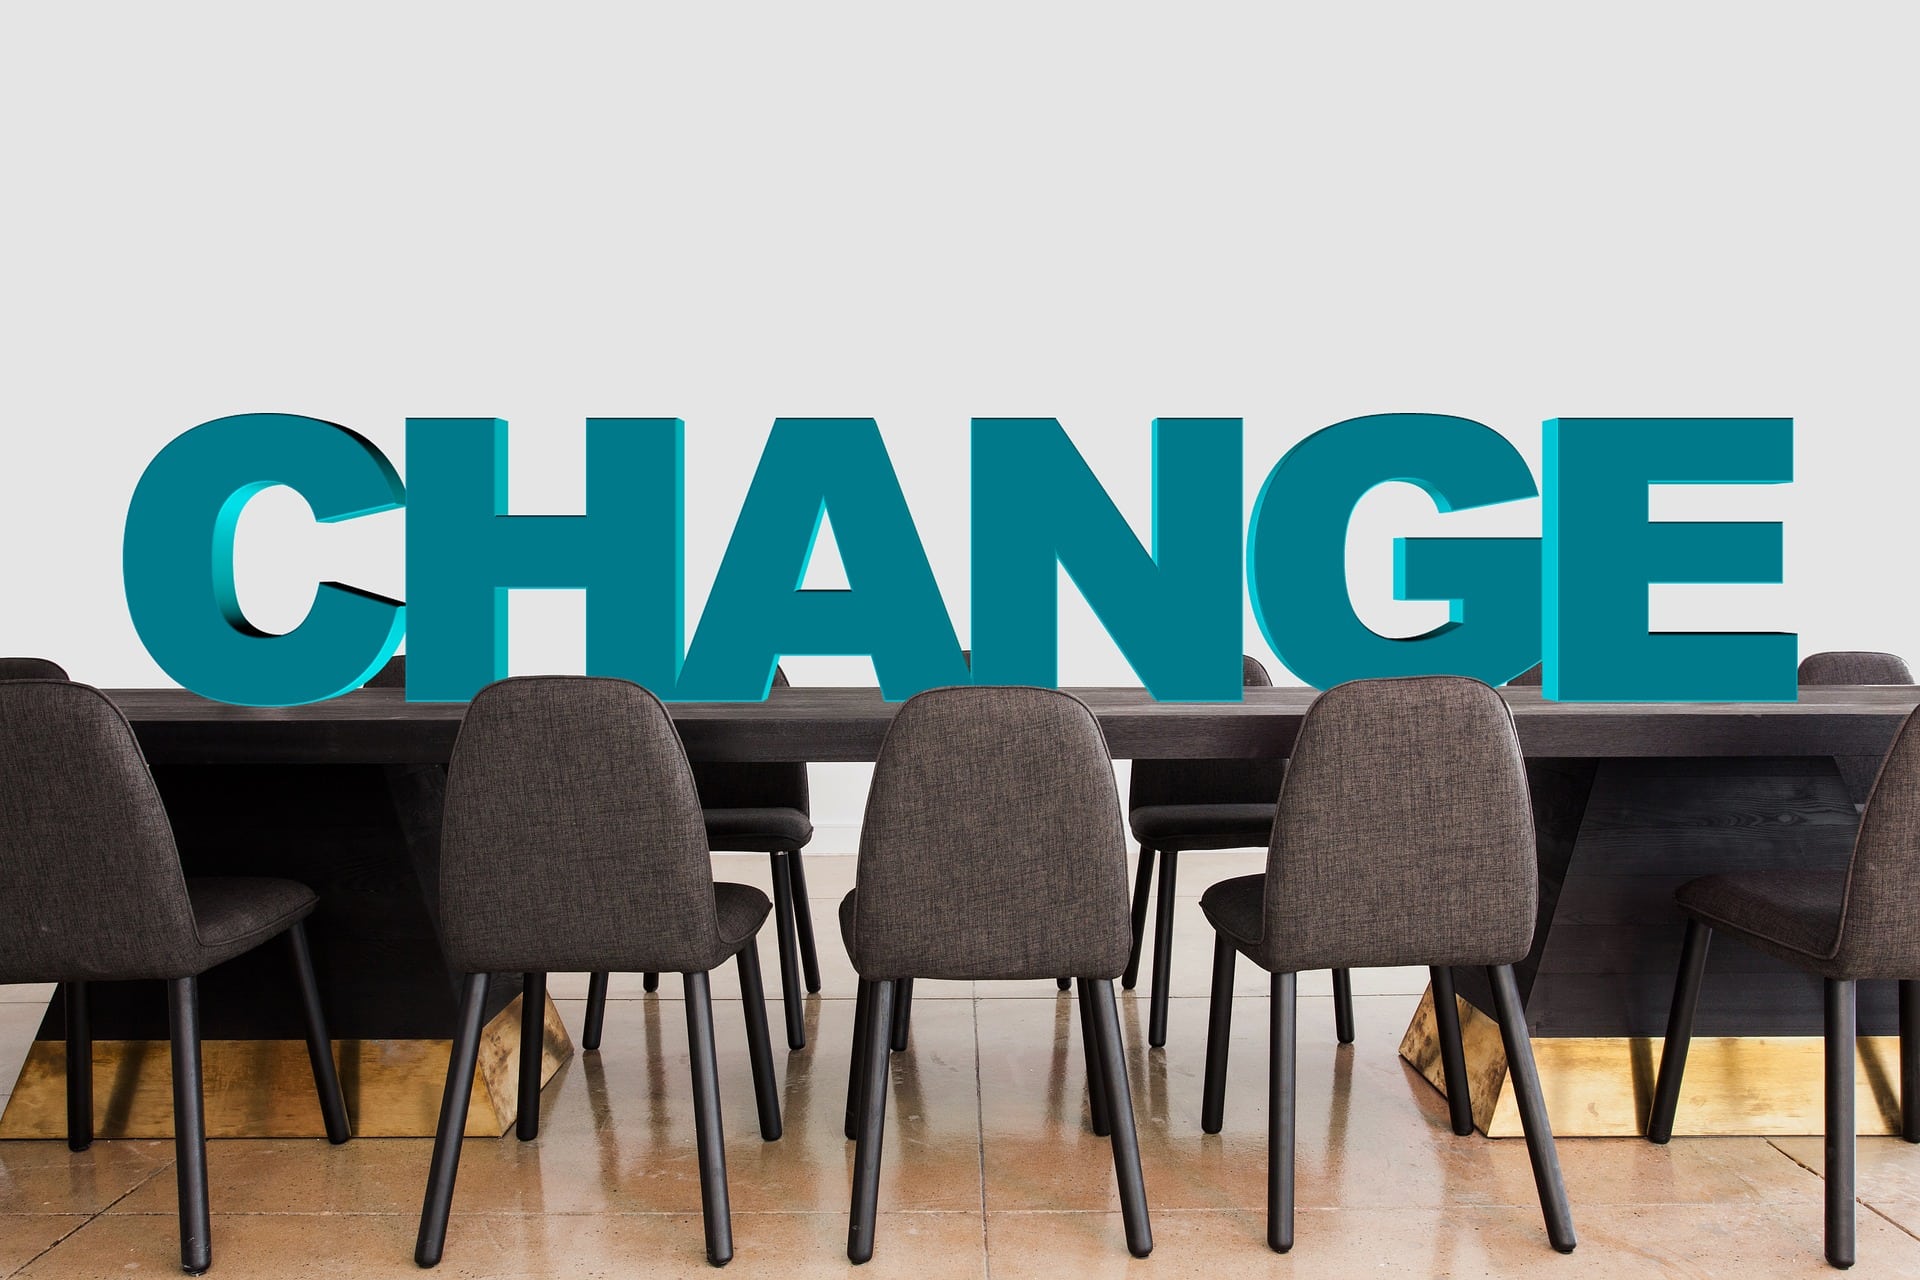 Strategies for Corporate Change: Insights from Gender Transition